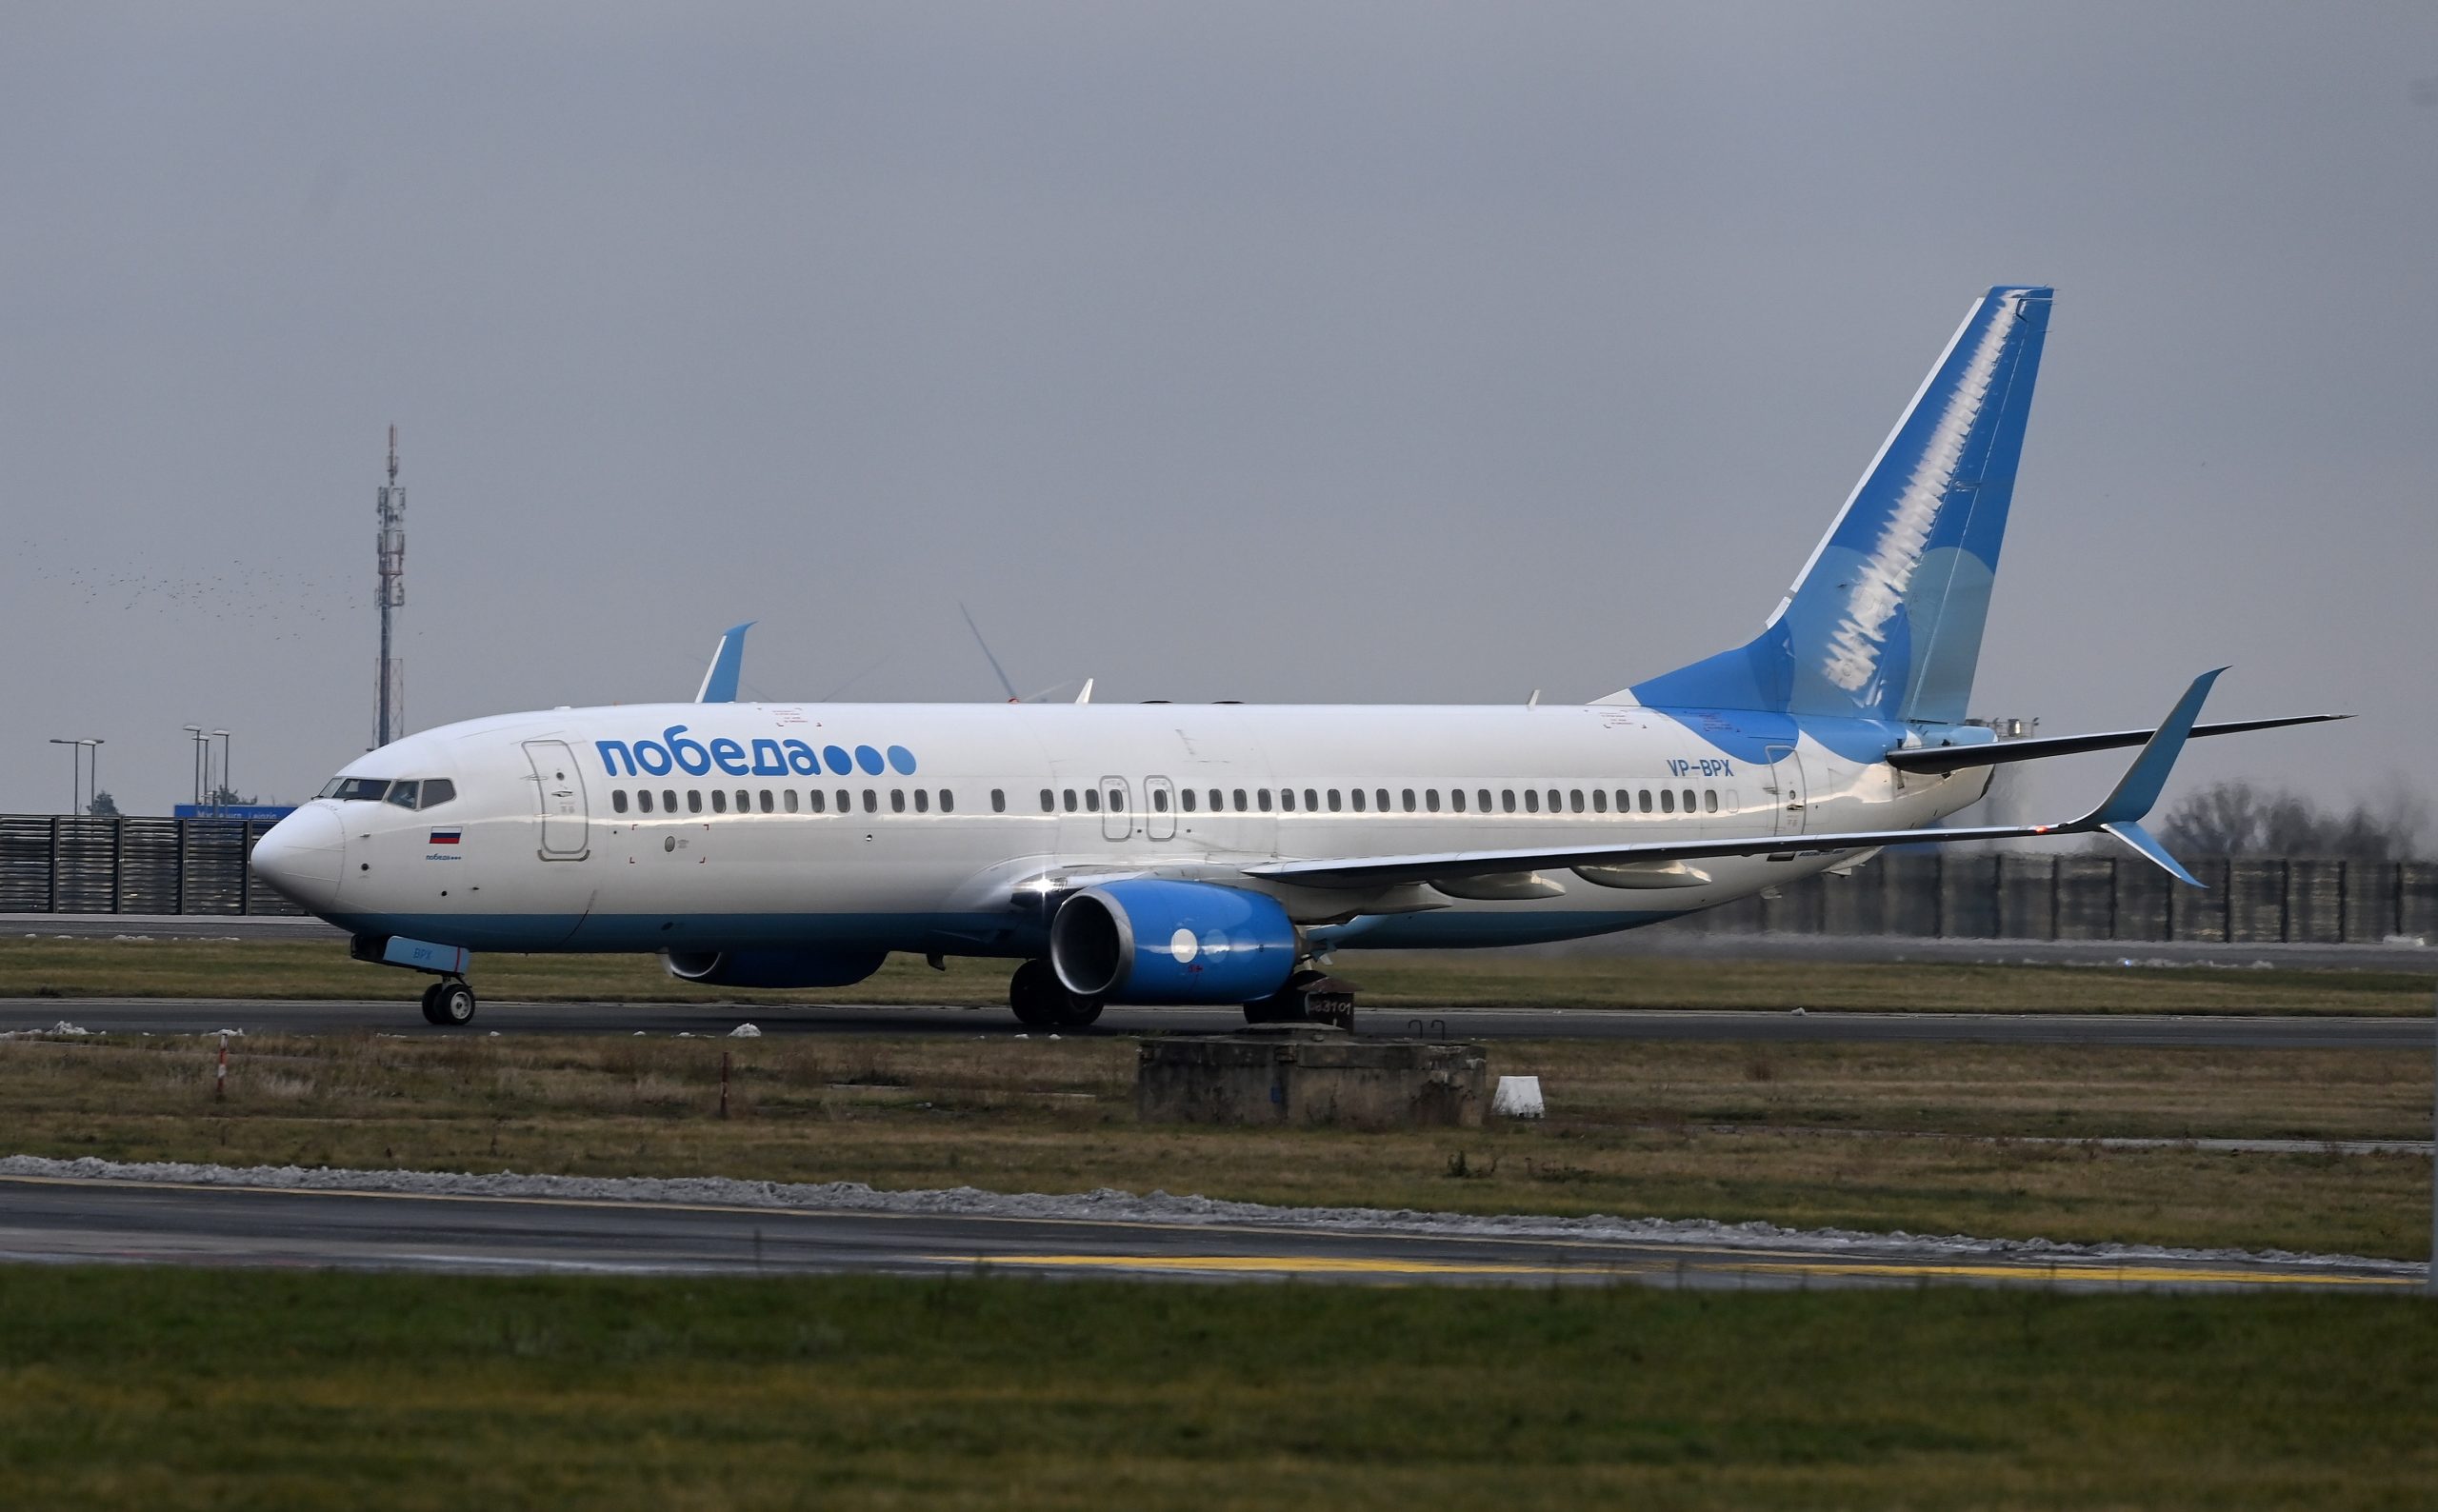 epa08943477 A Pobeda airlines plane, in which Russian opposition leader Alexei Navalny and his wife Yulia Navalnaya are to fly to Moscow, arrives at the Berlin Brandenburg International Airport BER in Schoenefeld, Germany, 17 January 2021. Navalny plans to return to Russia on a scheduled flight to Moscow later in the afternoon on 17 January. He was treated at the Charite hospital in Berlin since 22 August 2020 for being poisoned with a nerve agent from the Novichok group and was discharged from acute inpatient care on 22 September 2020.  EPA/FILIP SINGER